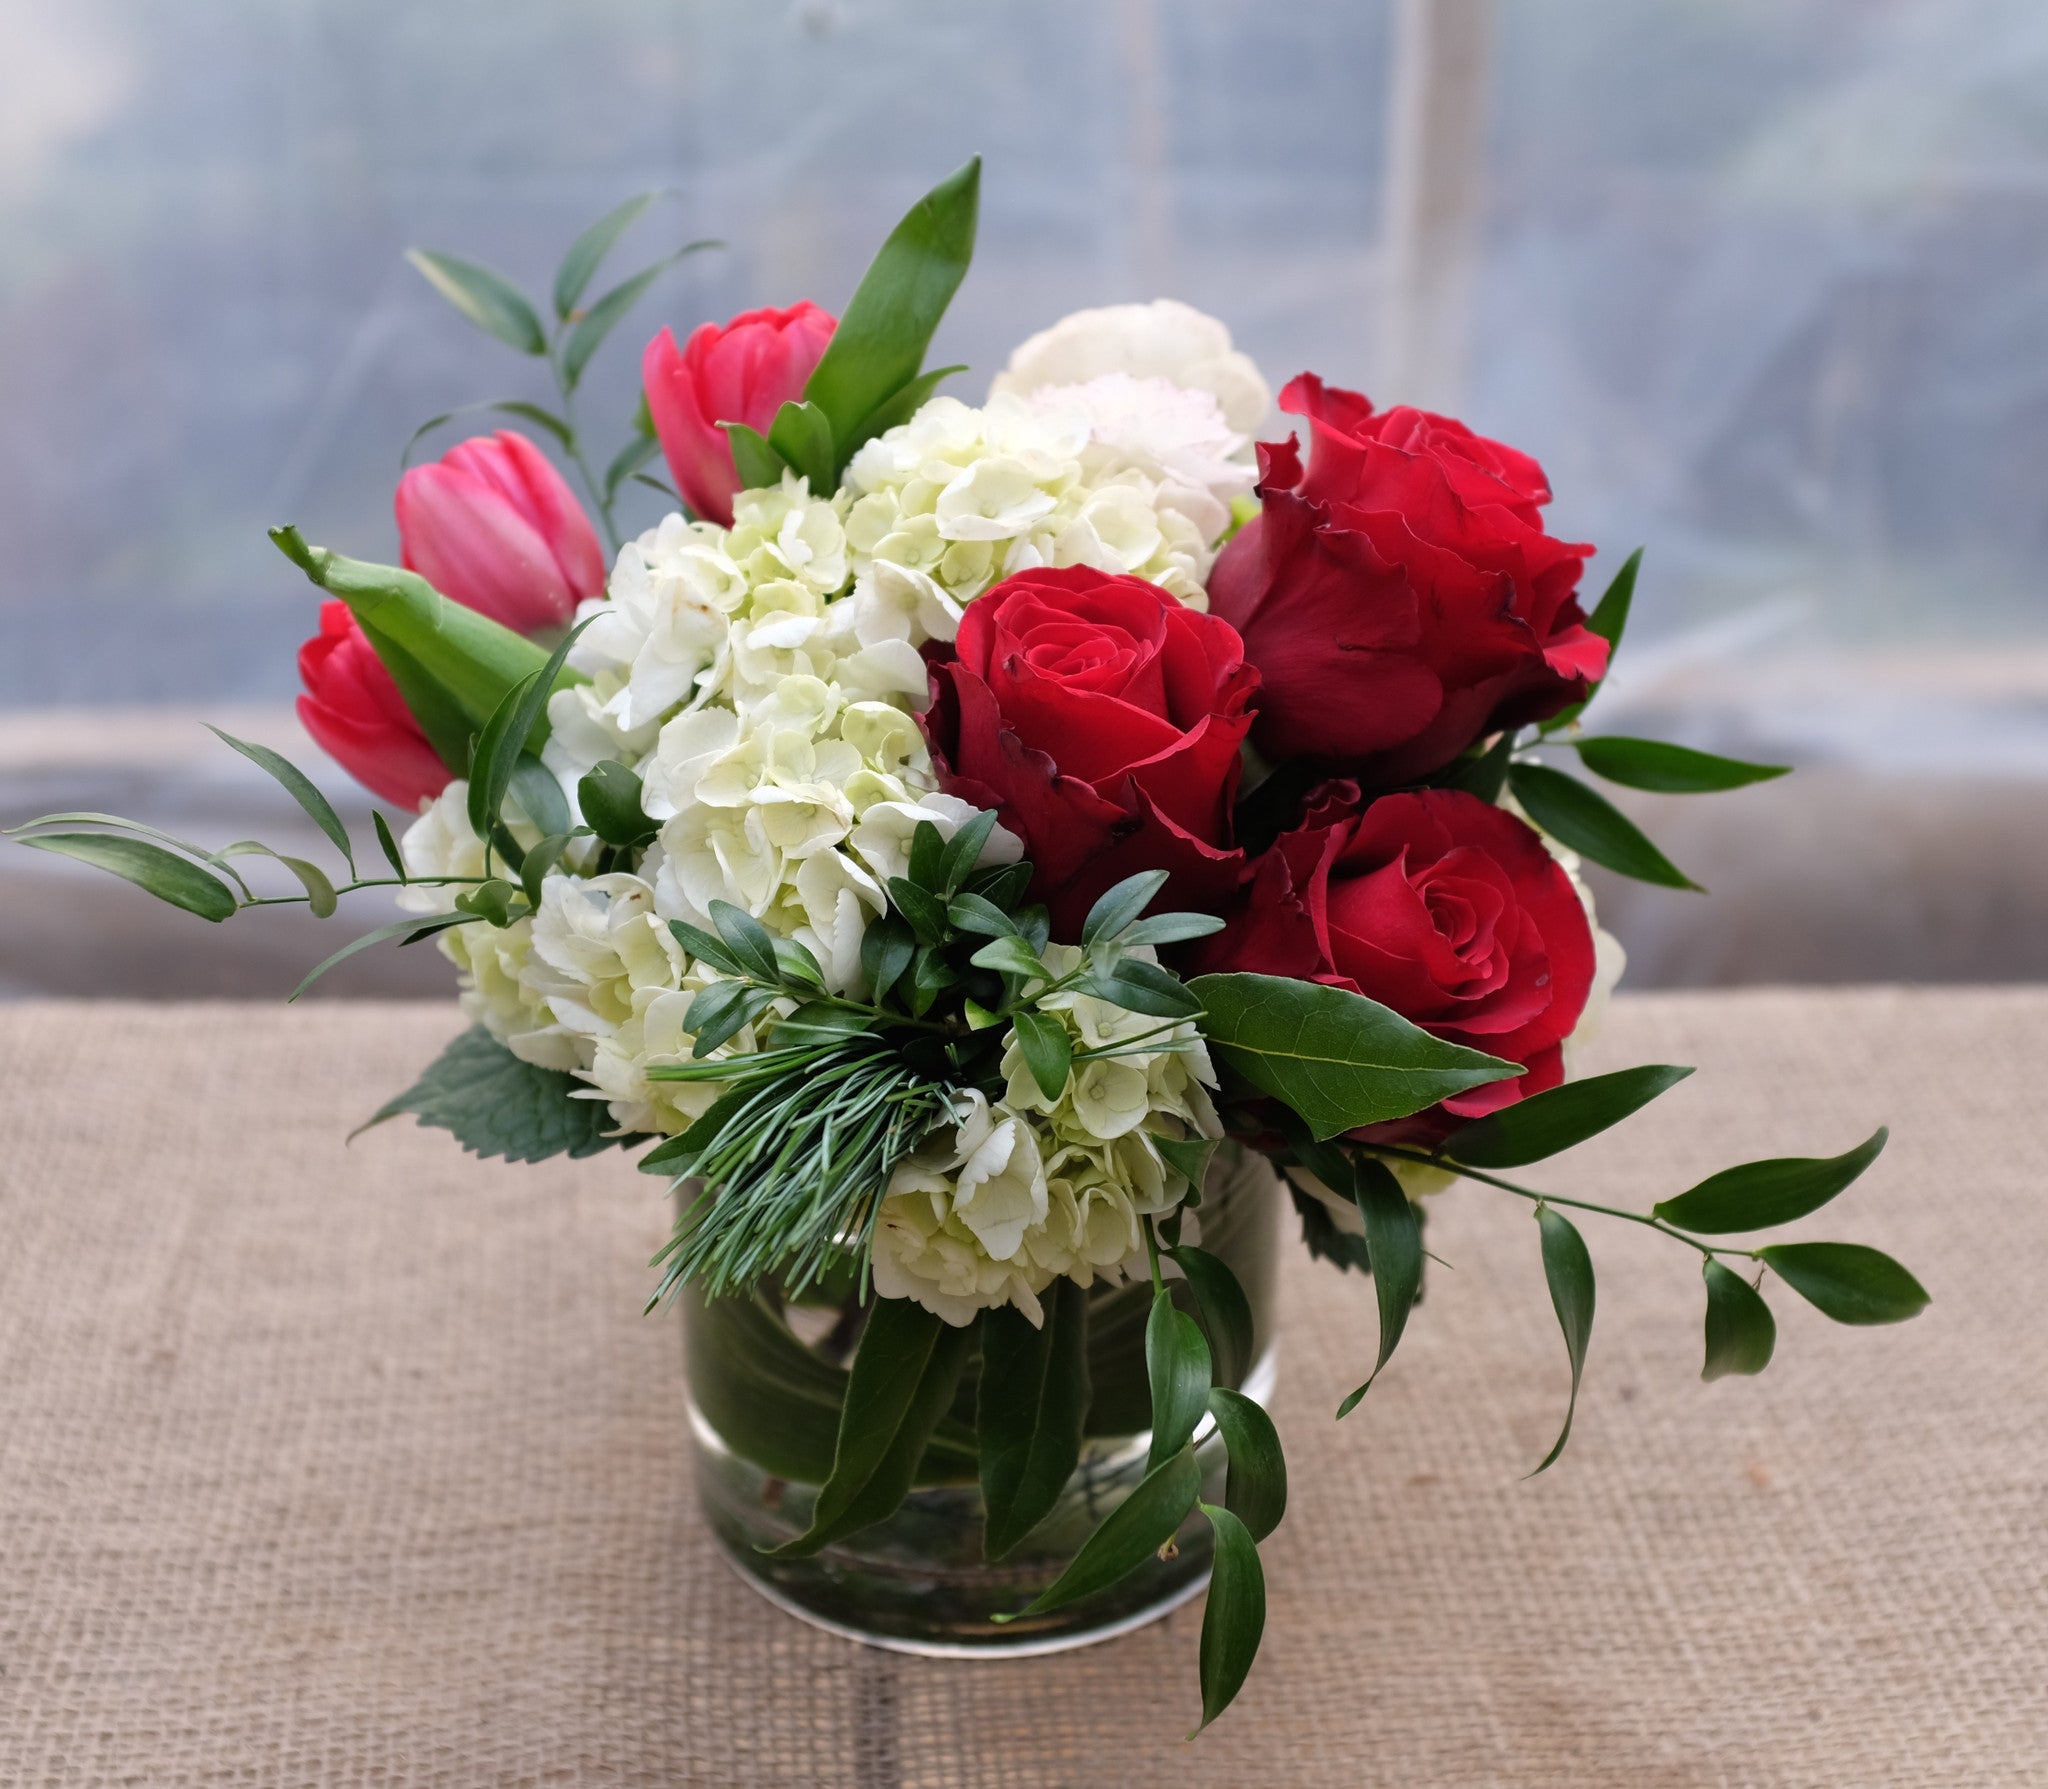 Blitzen: Christmas Flower Arrangement with Red Roses, Red Tulips, and White Hydrangea. Designed by Michler's Florist in Lexington, KY